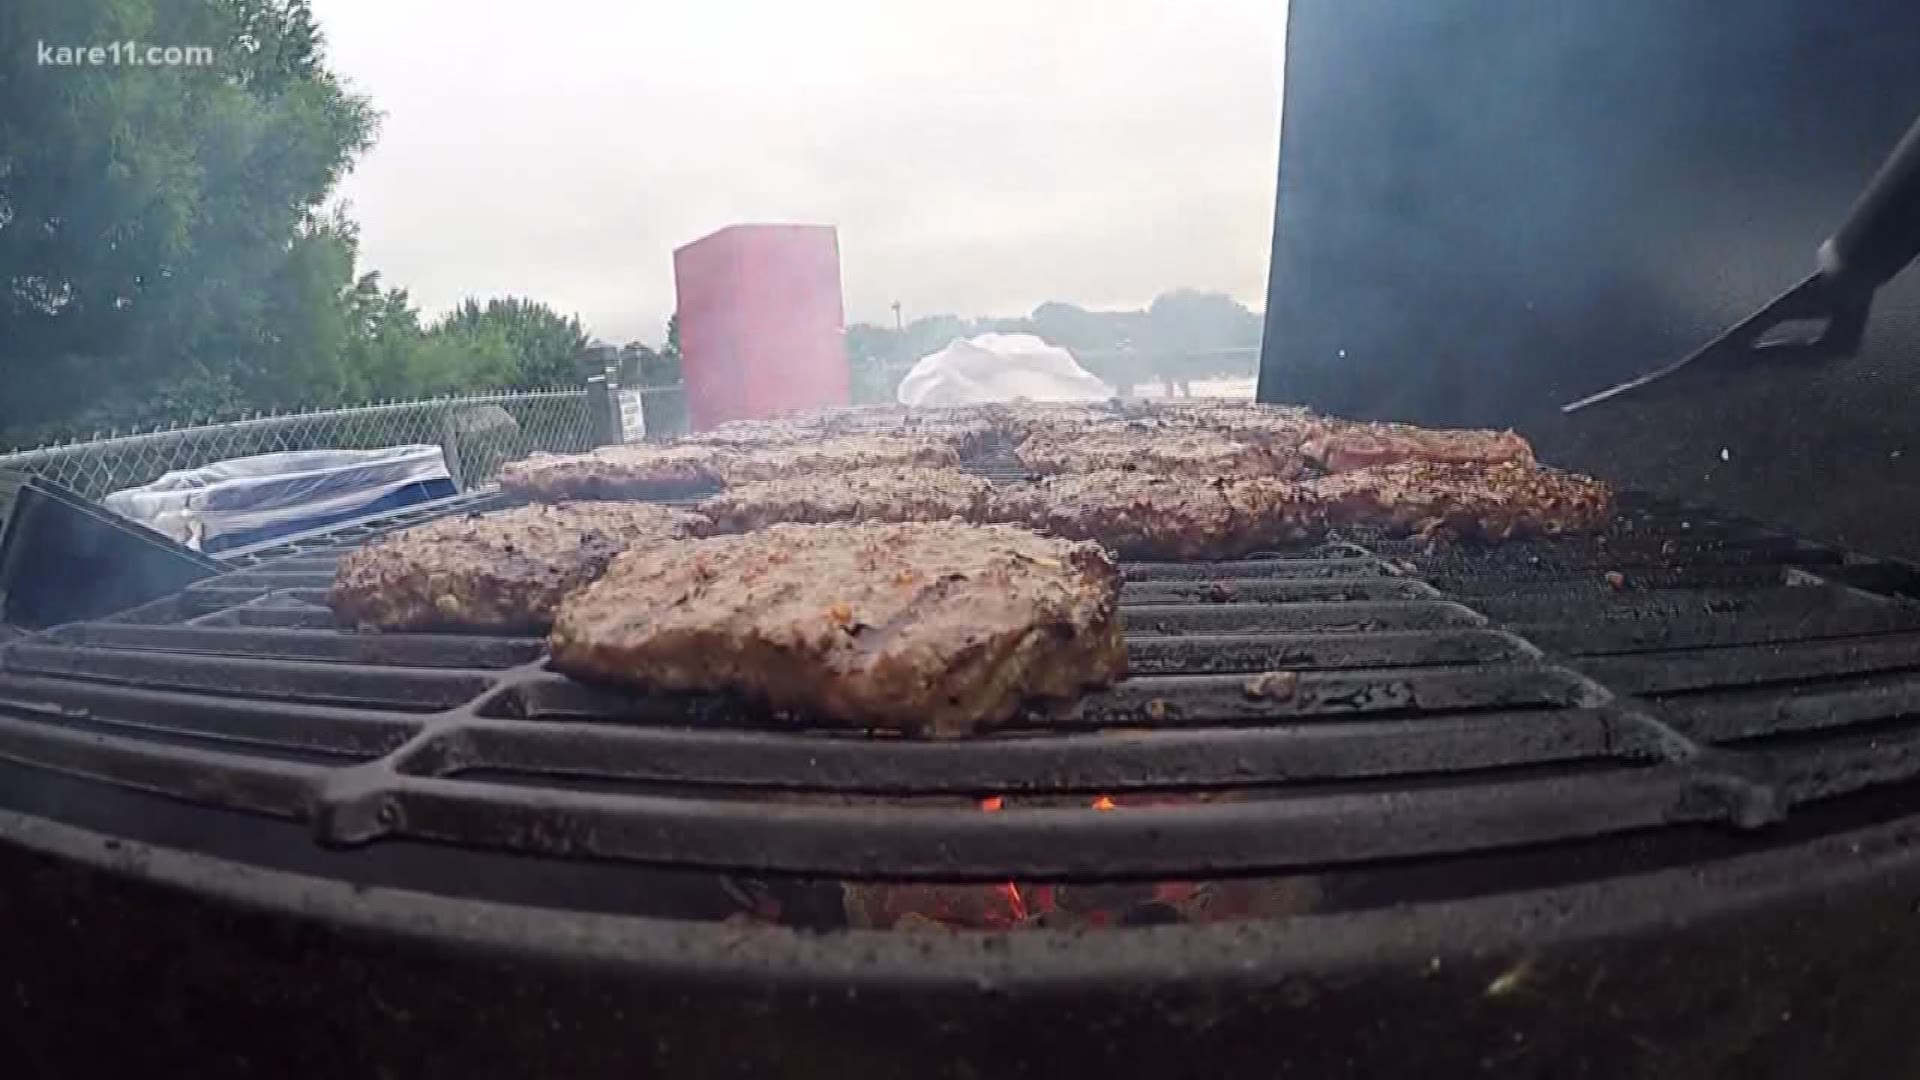 This time of year, we often see warnings about grilled foods creating carcinogens. True or false? https://kare11.tv/2J4z14U